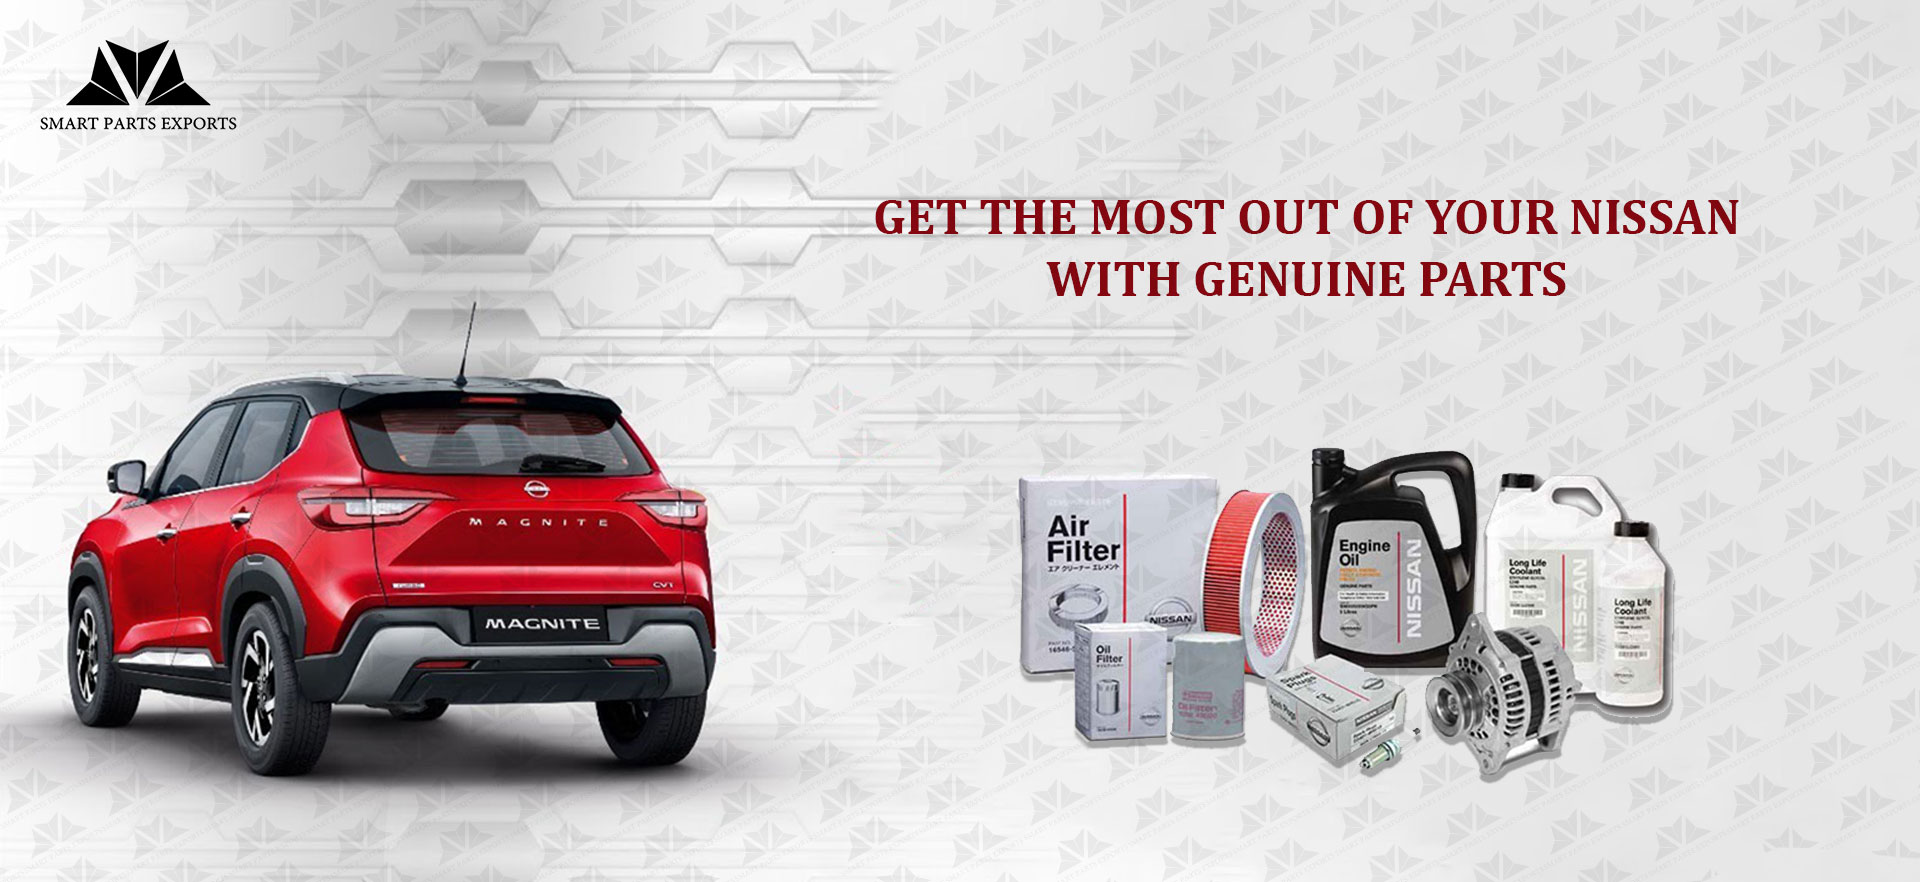 Get the Most Out Of Your Nissan With Genuine Parts